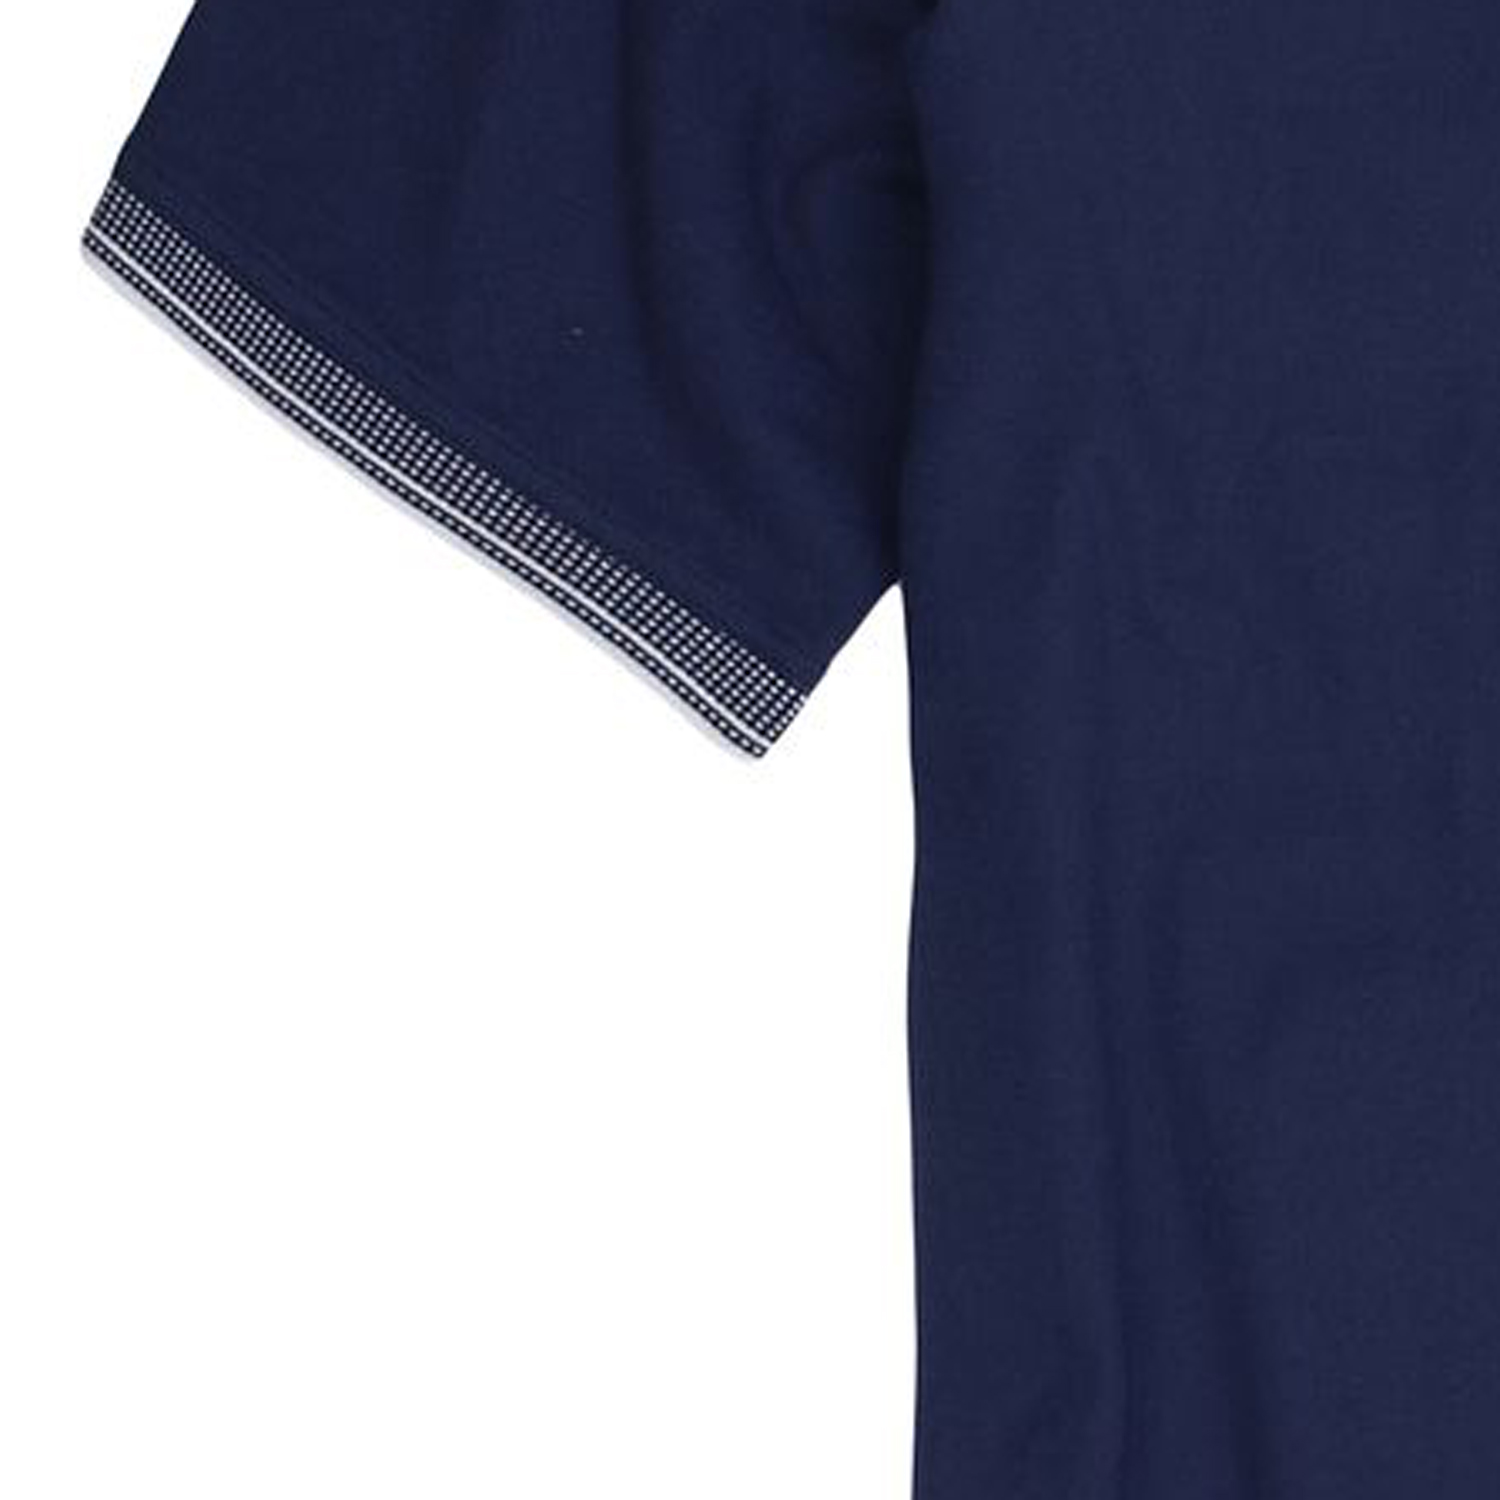 Polo shirt "stay fresh" for men by hajo in navy blue up to oversize 6XL